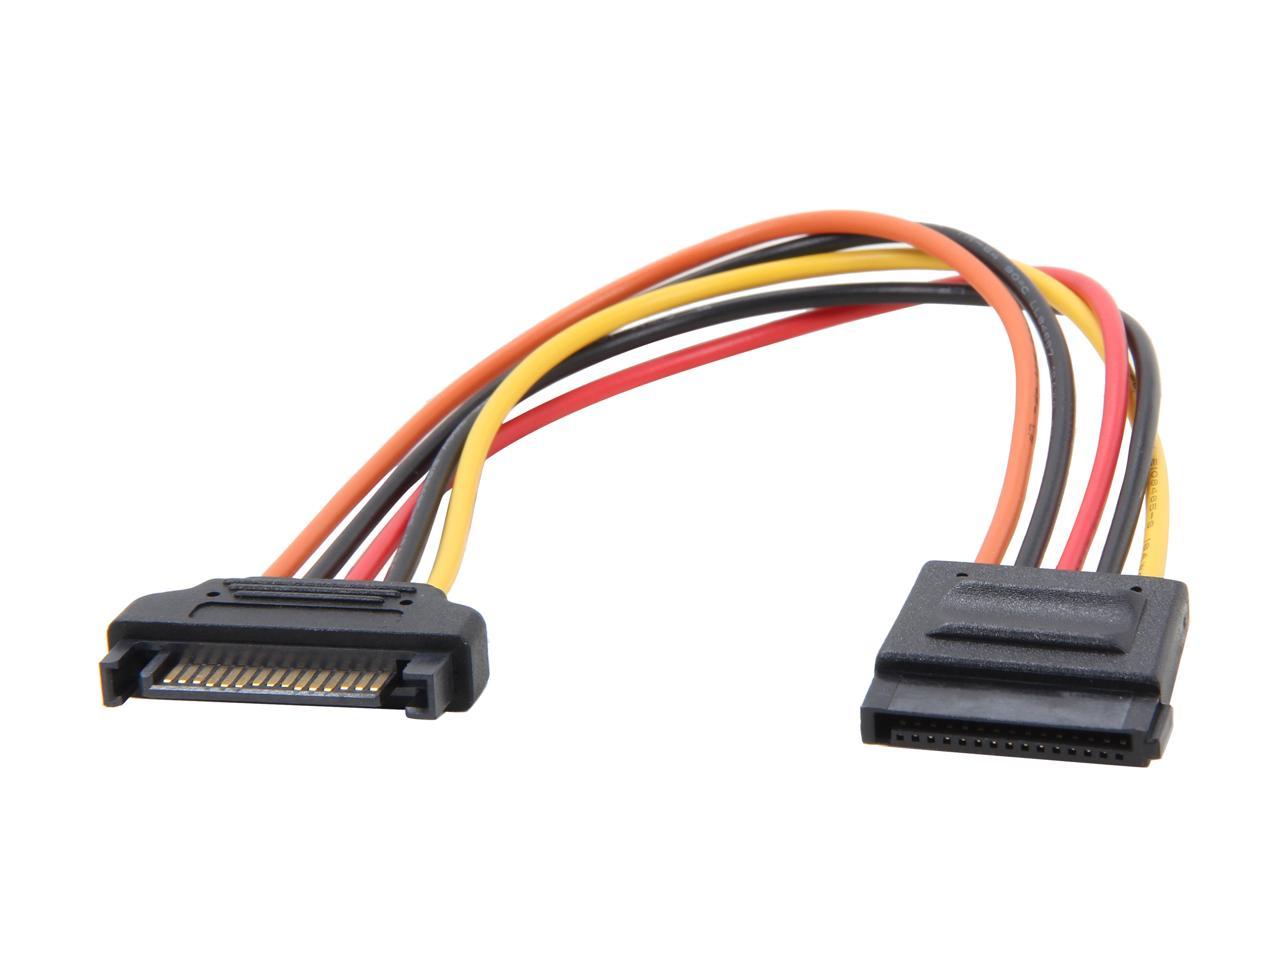 12inch SATA 15pin Power Extension Cable